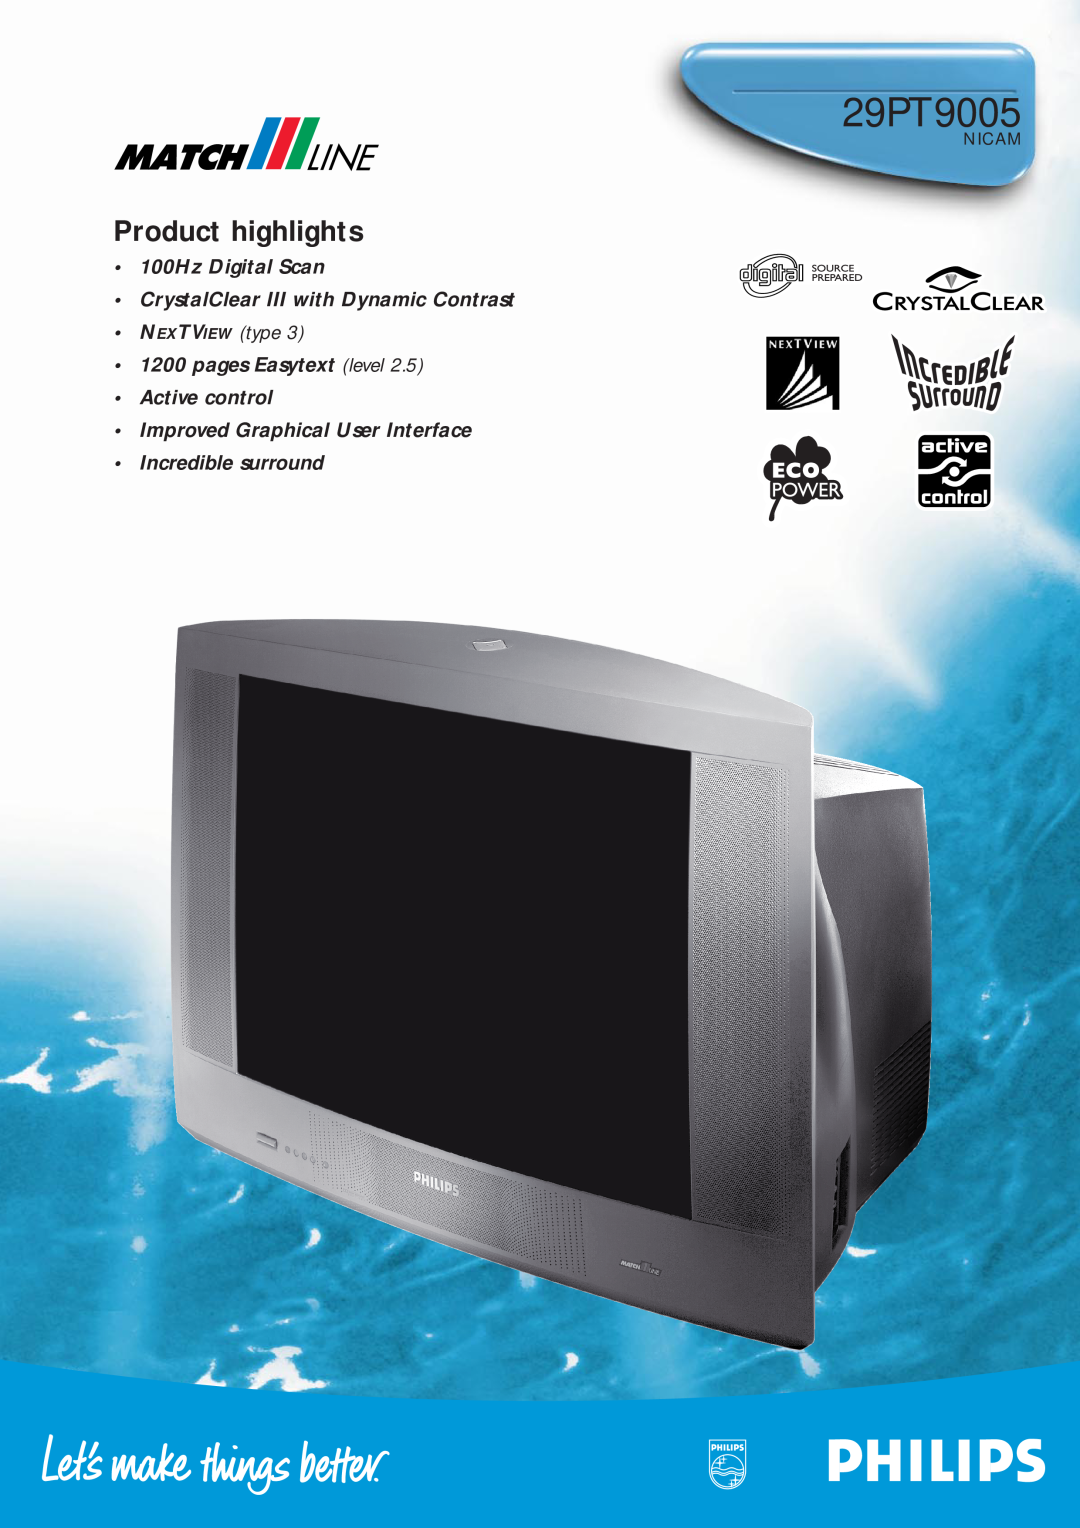 Philips 29PT9005 Nicam manual Product highlights, 100Hz Digital Scan CrystalClear III with Dynamic Contrast, NEXTVIEW type 